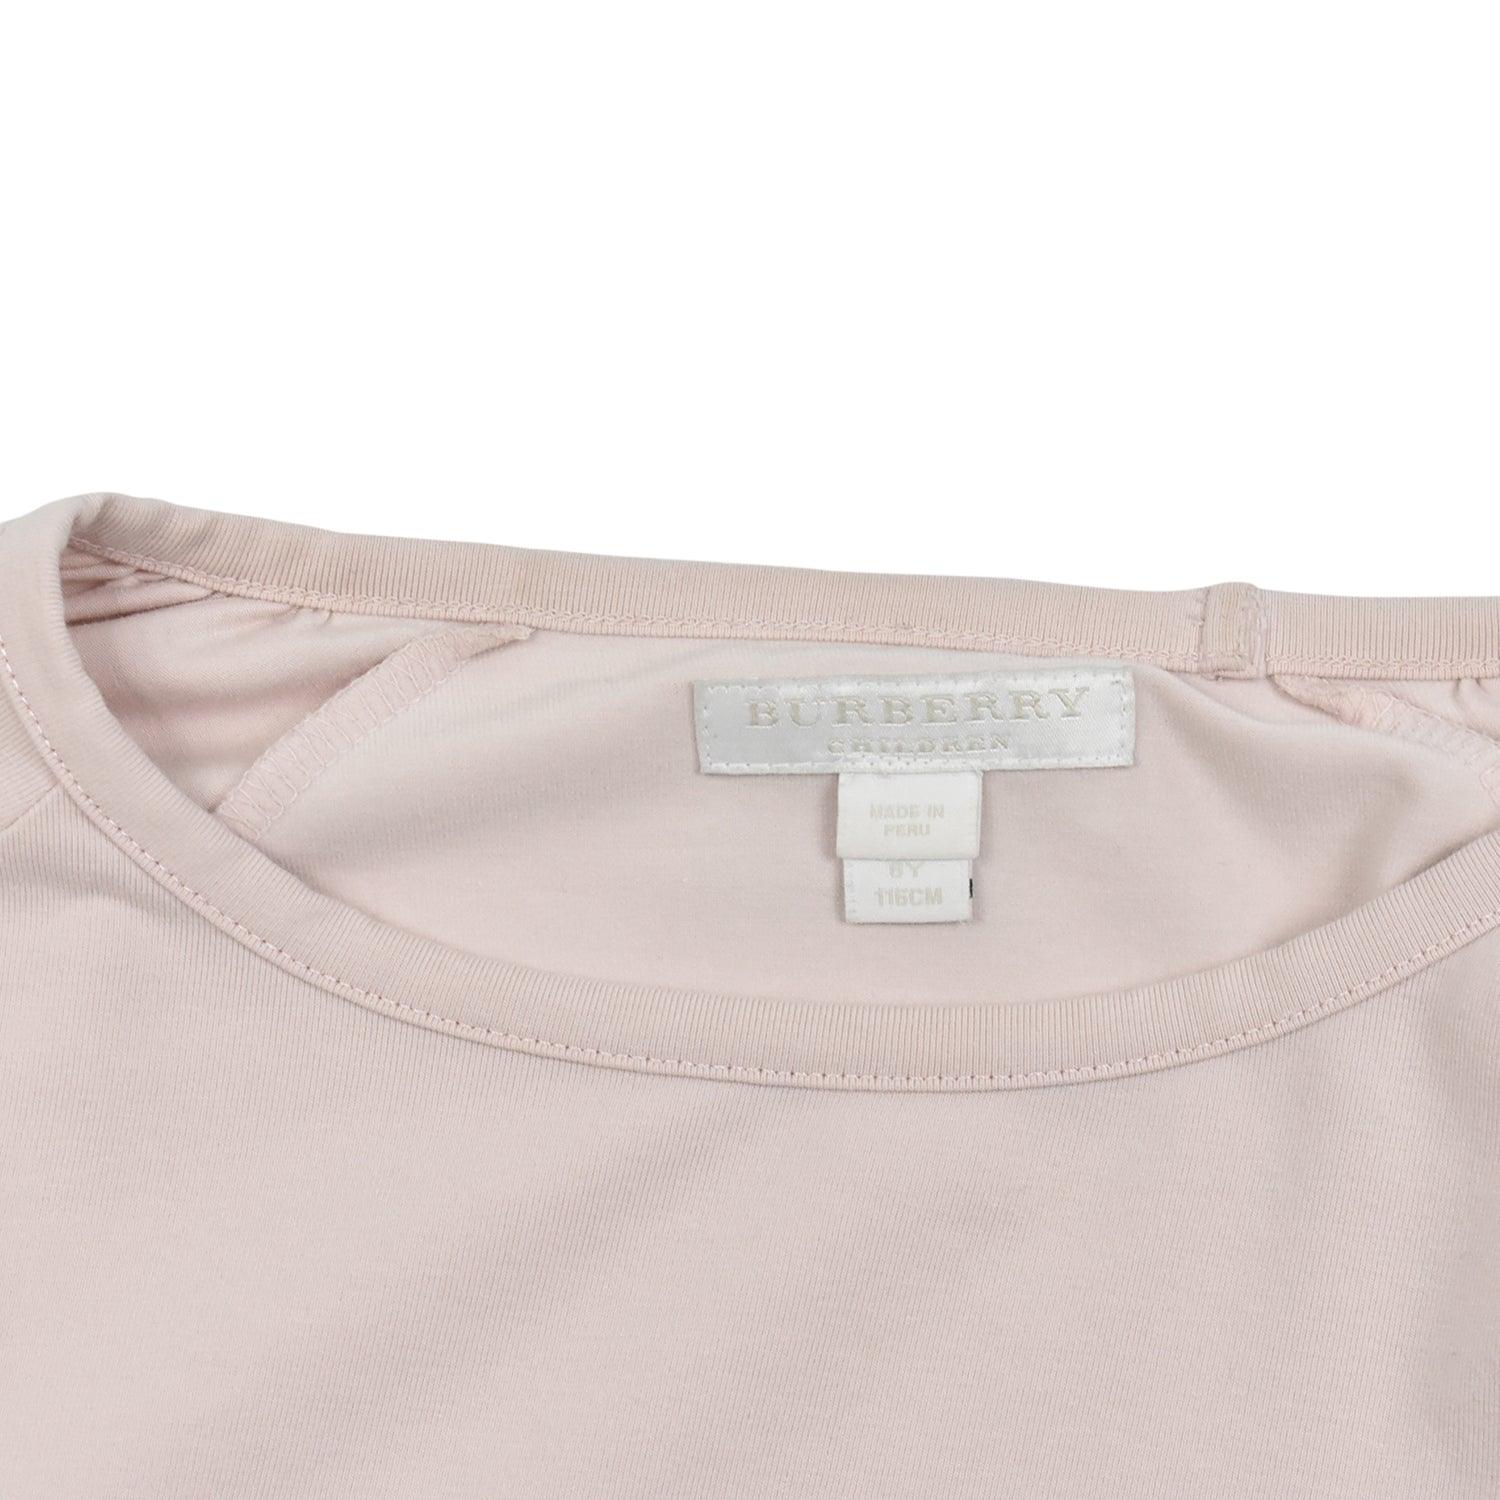 Burberry Top - Youth 6Y - Fashionably Yours